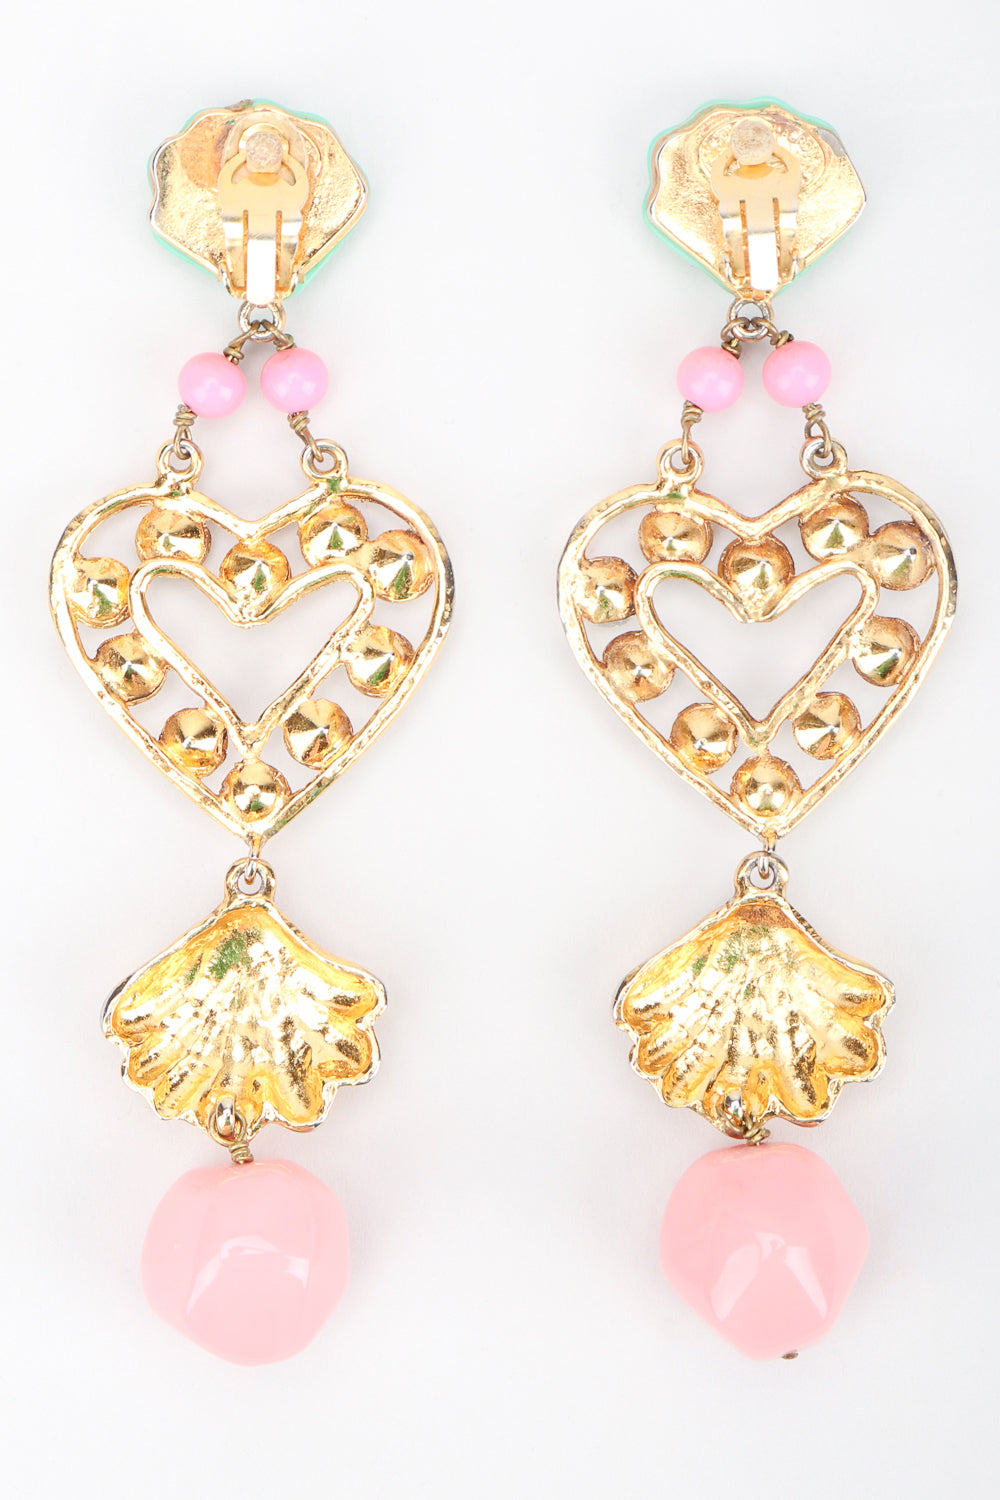 Recess Los Angeles Designer Consignment Resale Recycling Vintage Christian Lacroix Mermaid Shell Crystal Heart Drop Earrings